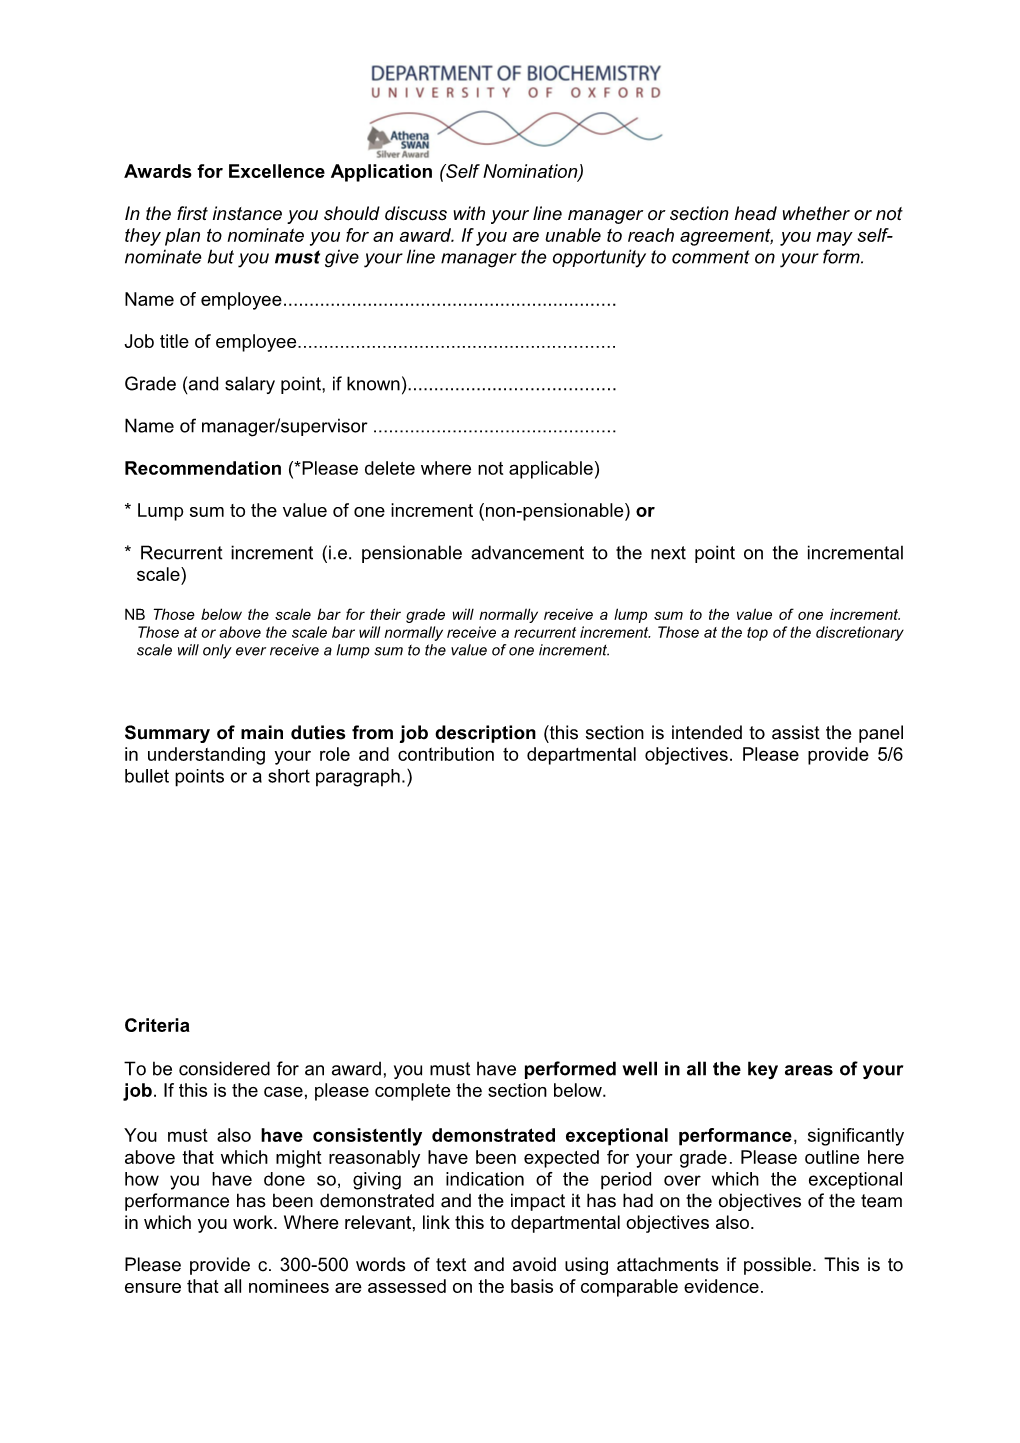 Awards for Excellence Application (Selfnomination)